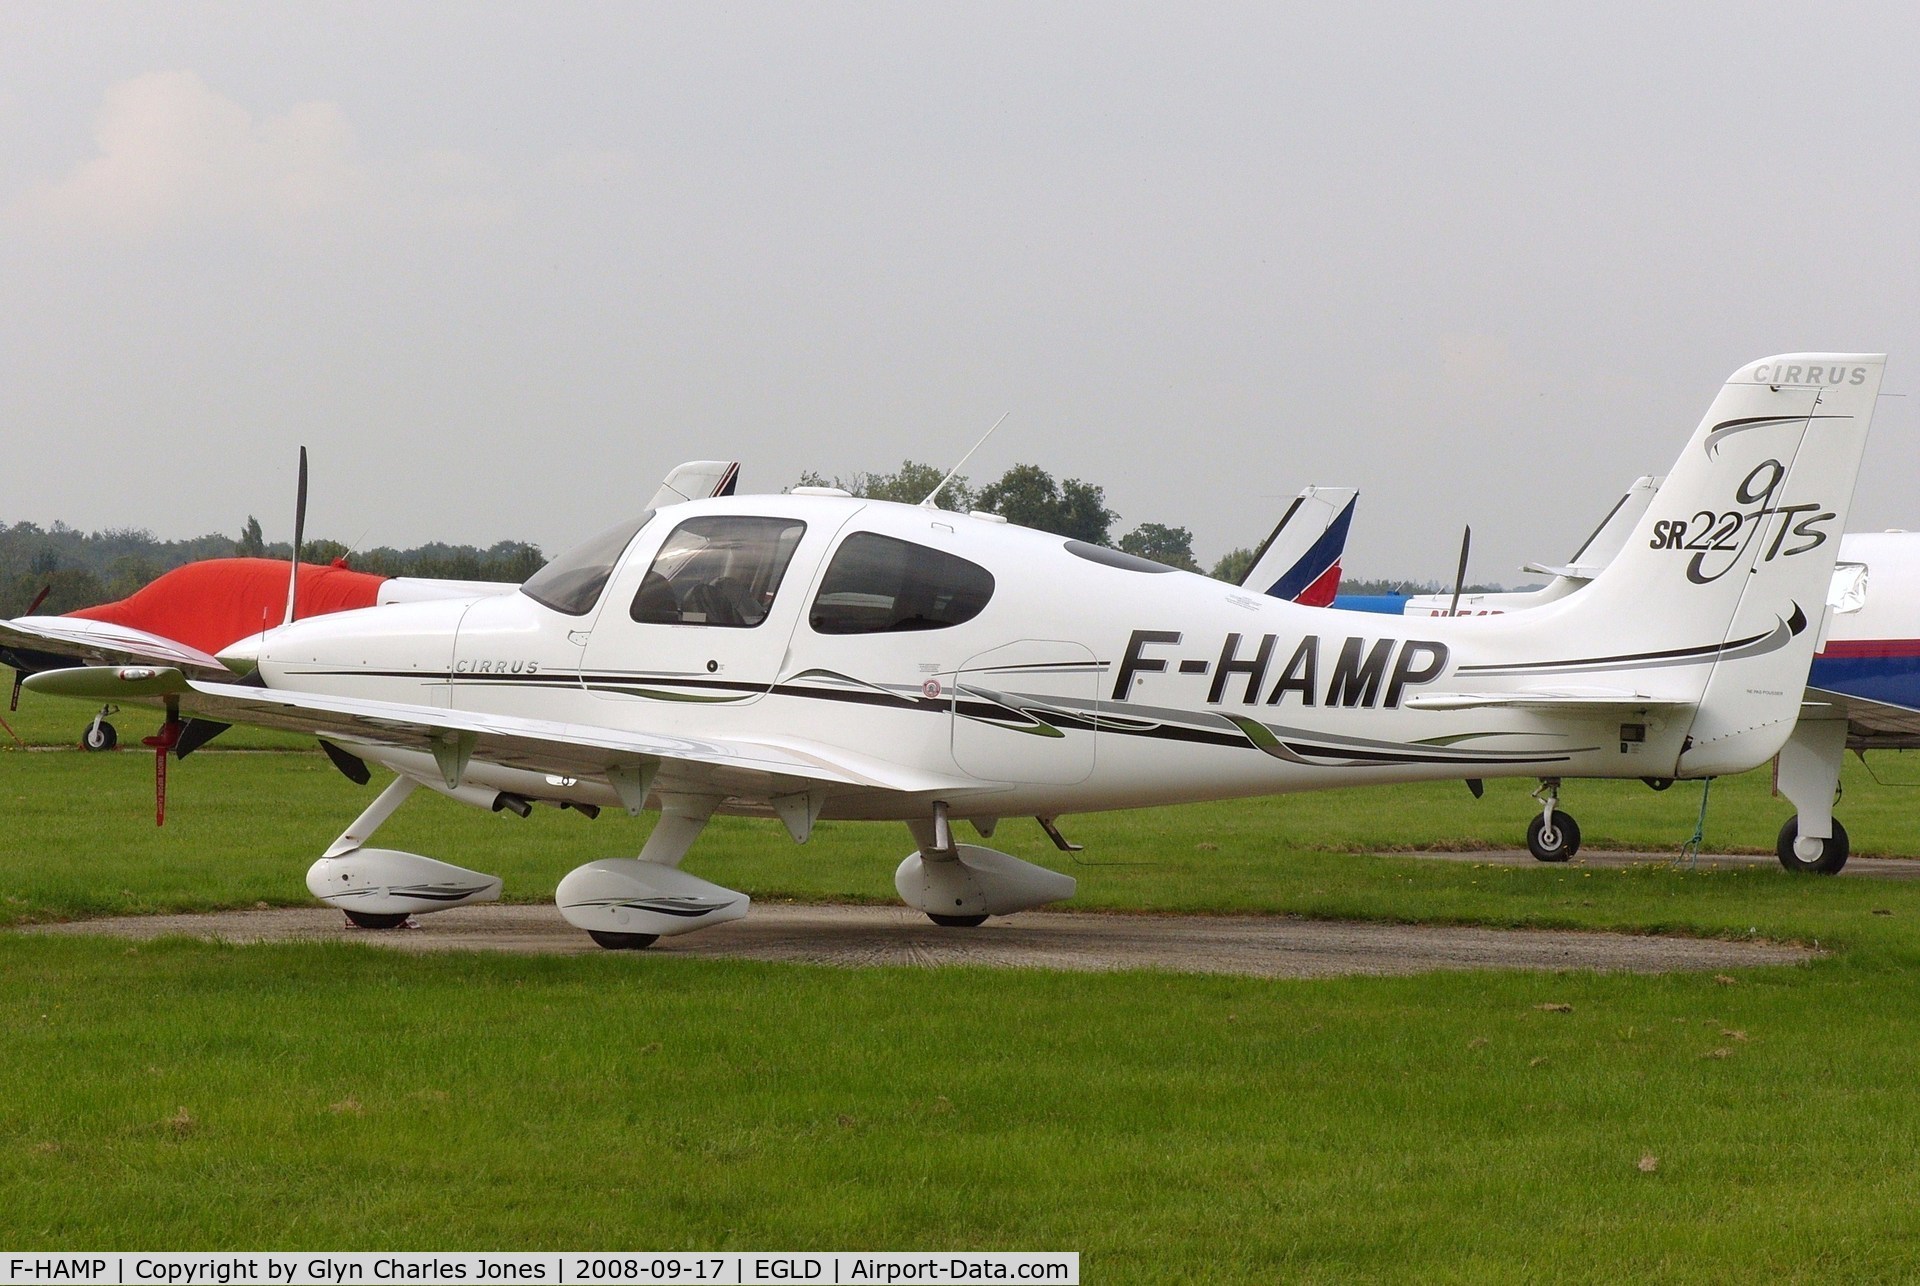 F-HAMP, 2006 Cirrus SR22 GTS C/N 2286, Previously N959SR. Built in 2006. Owned by Boston Capital Management Aviation SARL.